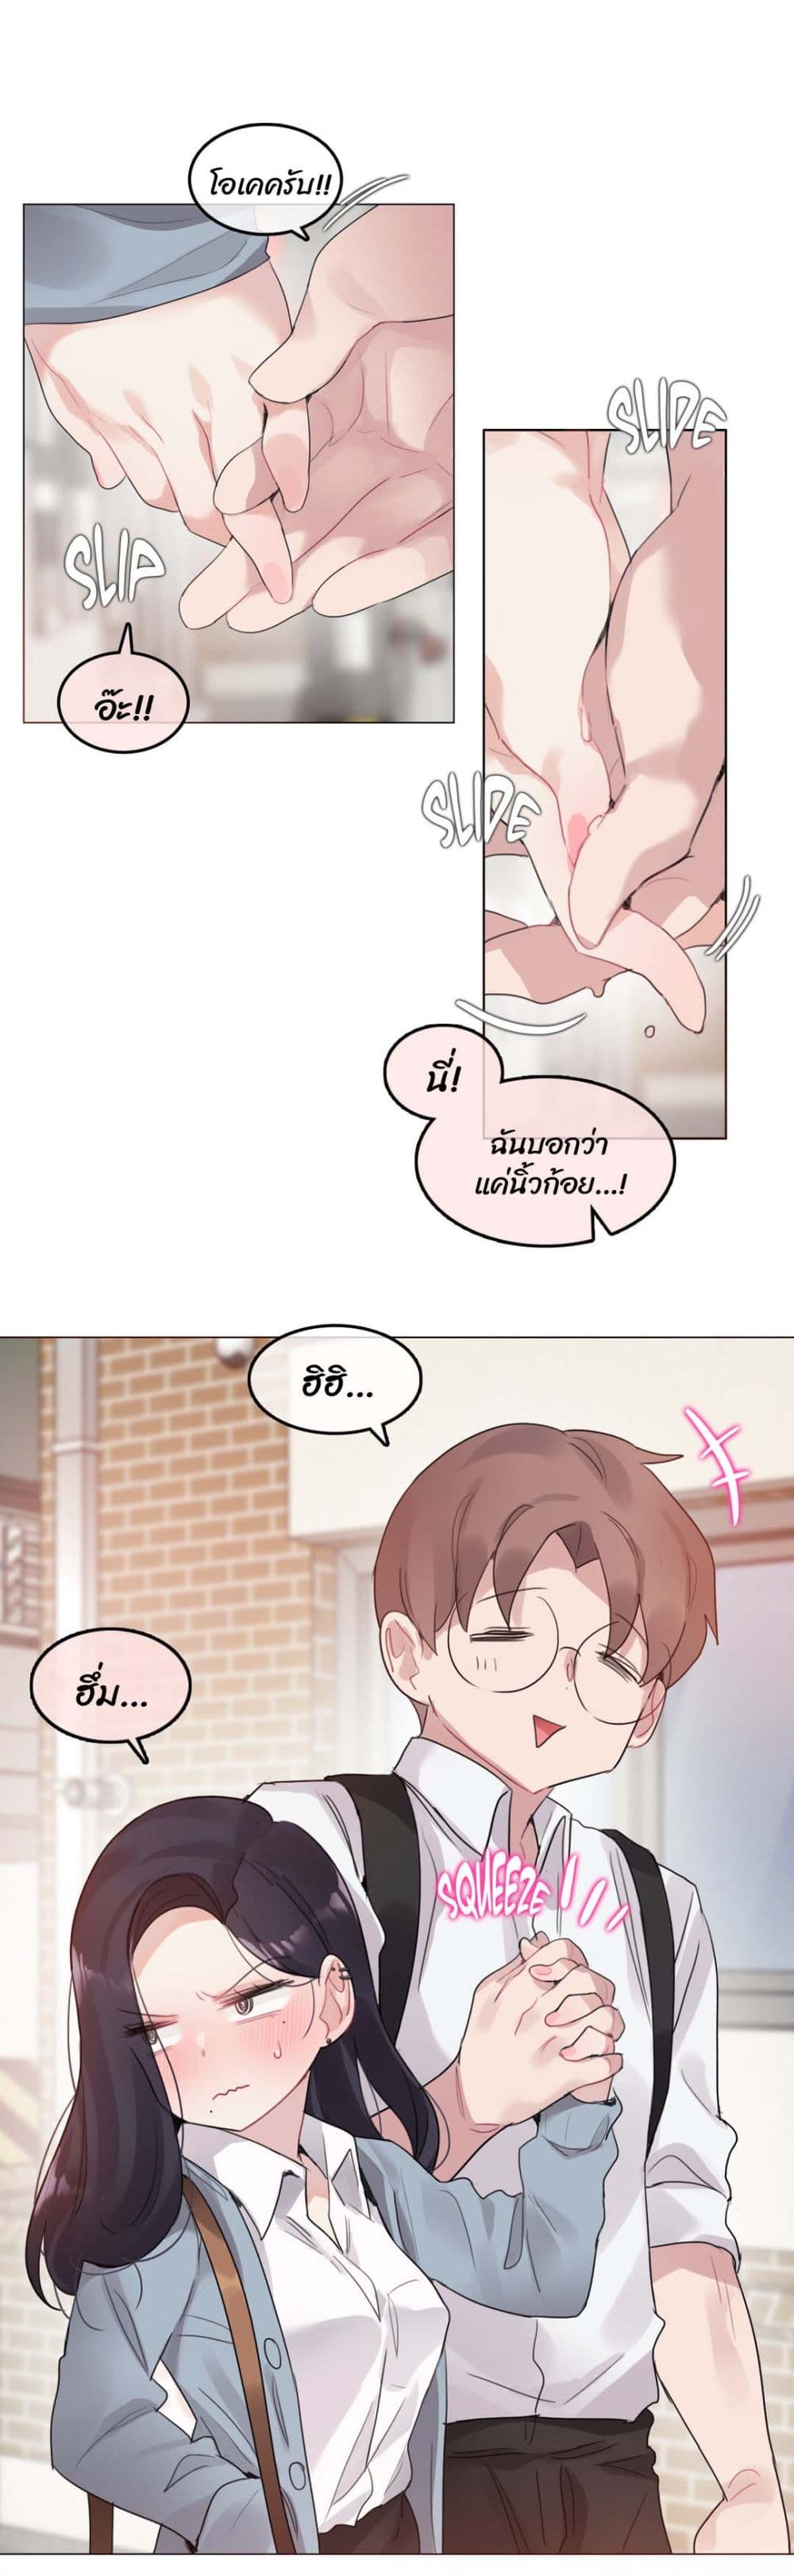 A Pervert's Daily Life 104 (16)